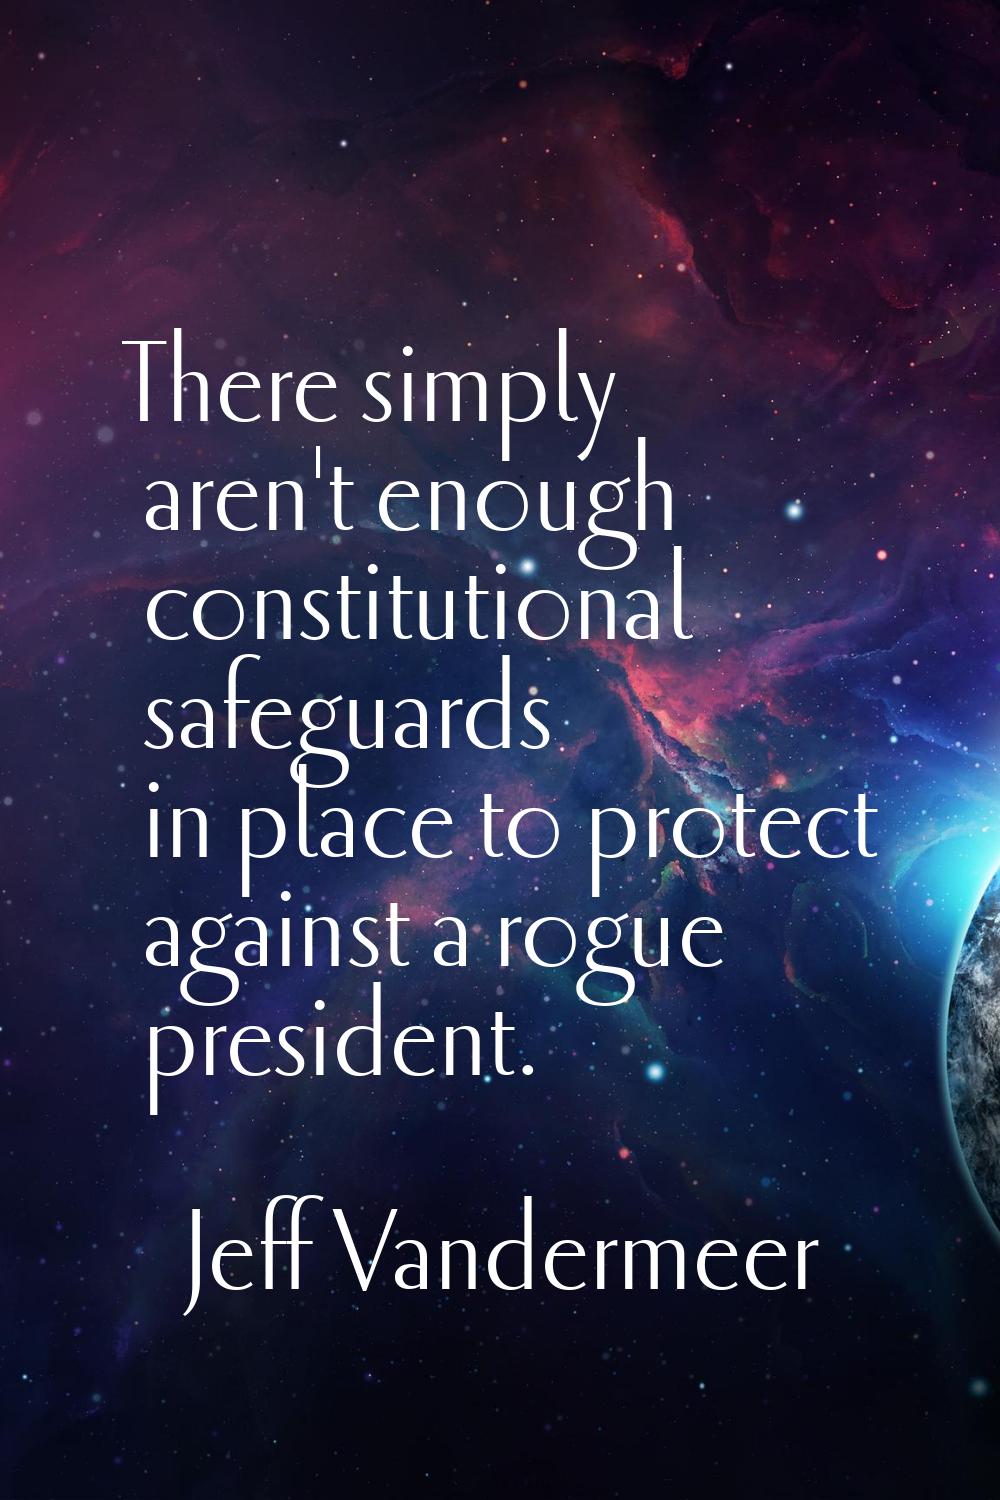 There simply aren't enough constitutional safeguards in place to protect against a rogue president.